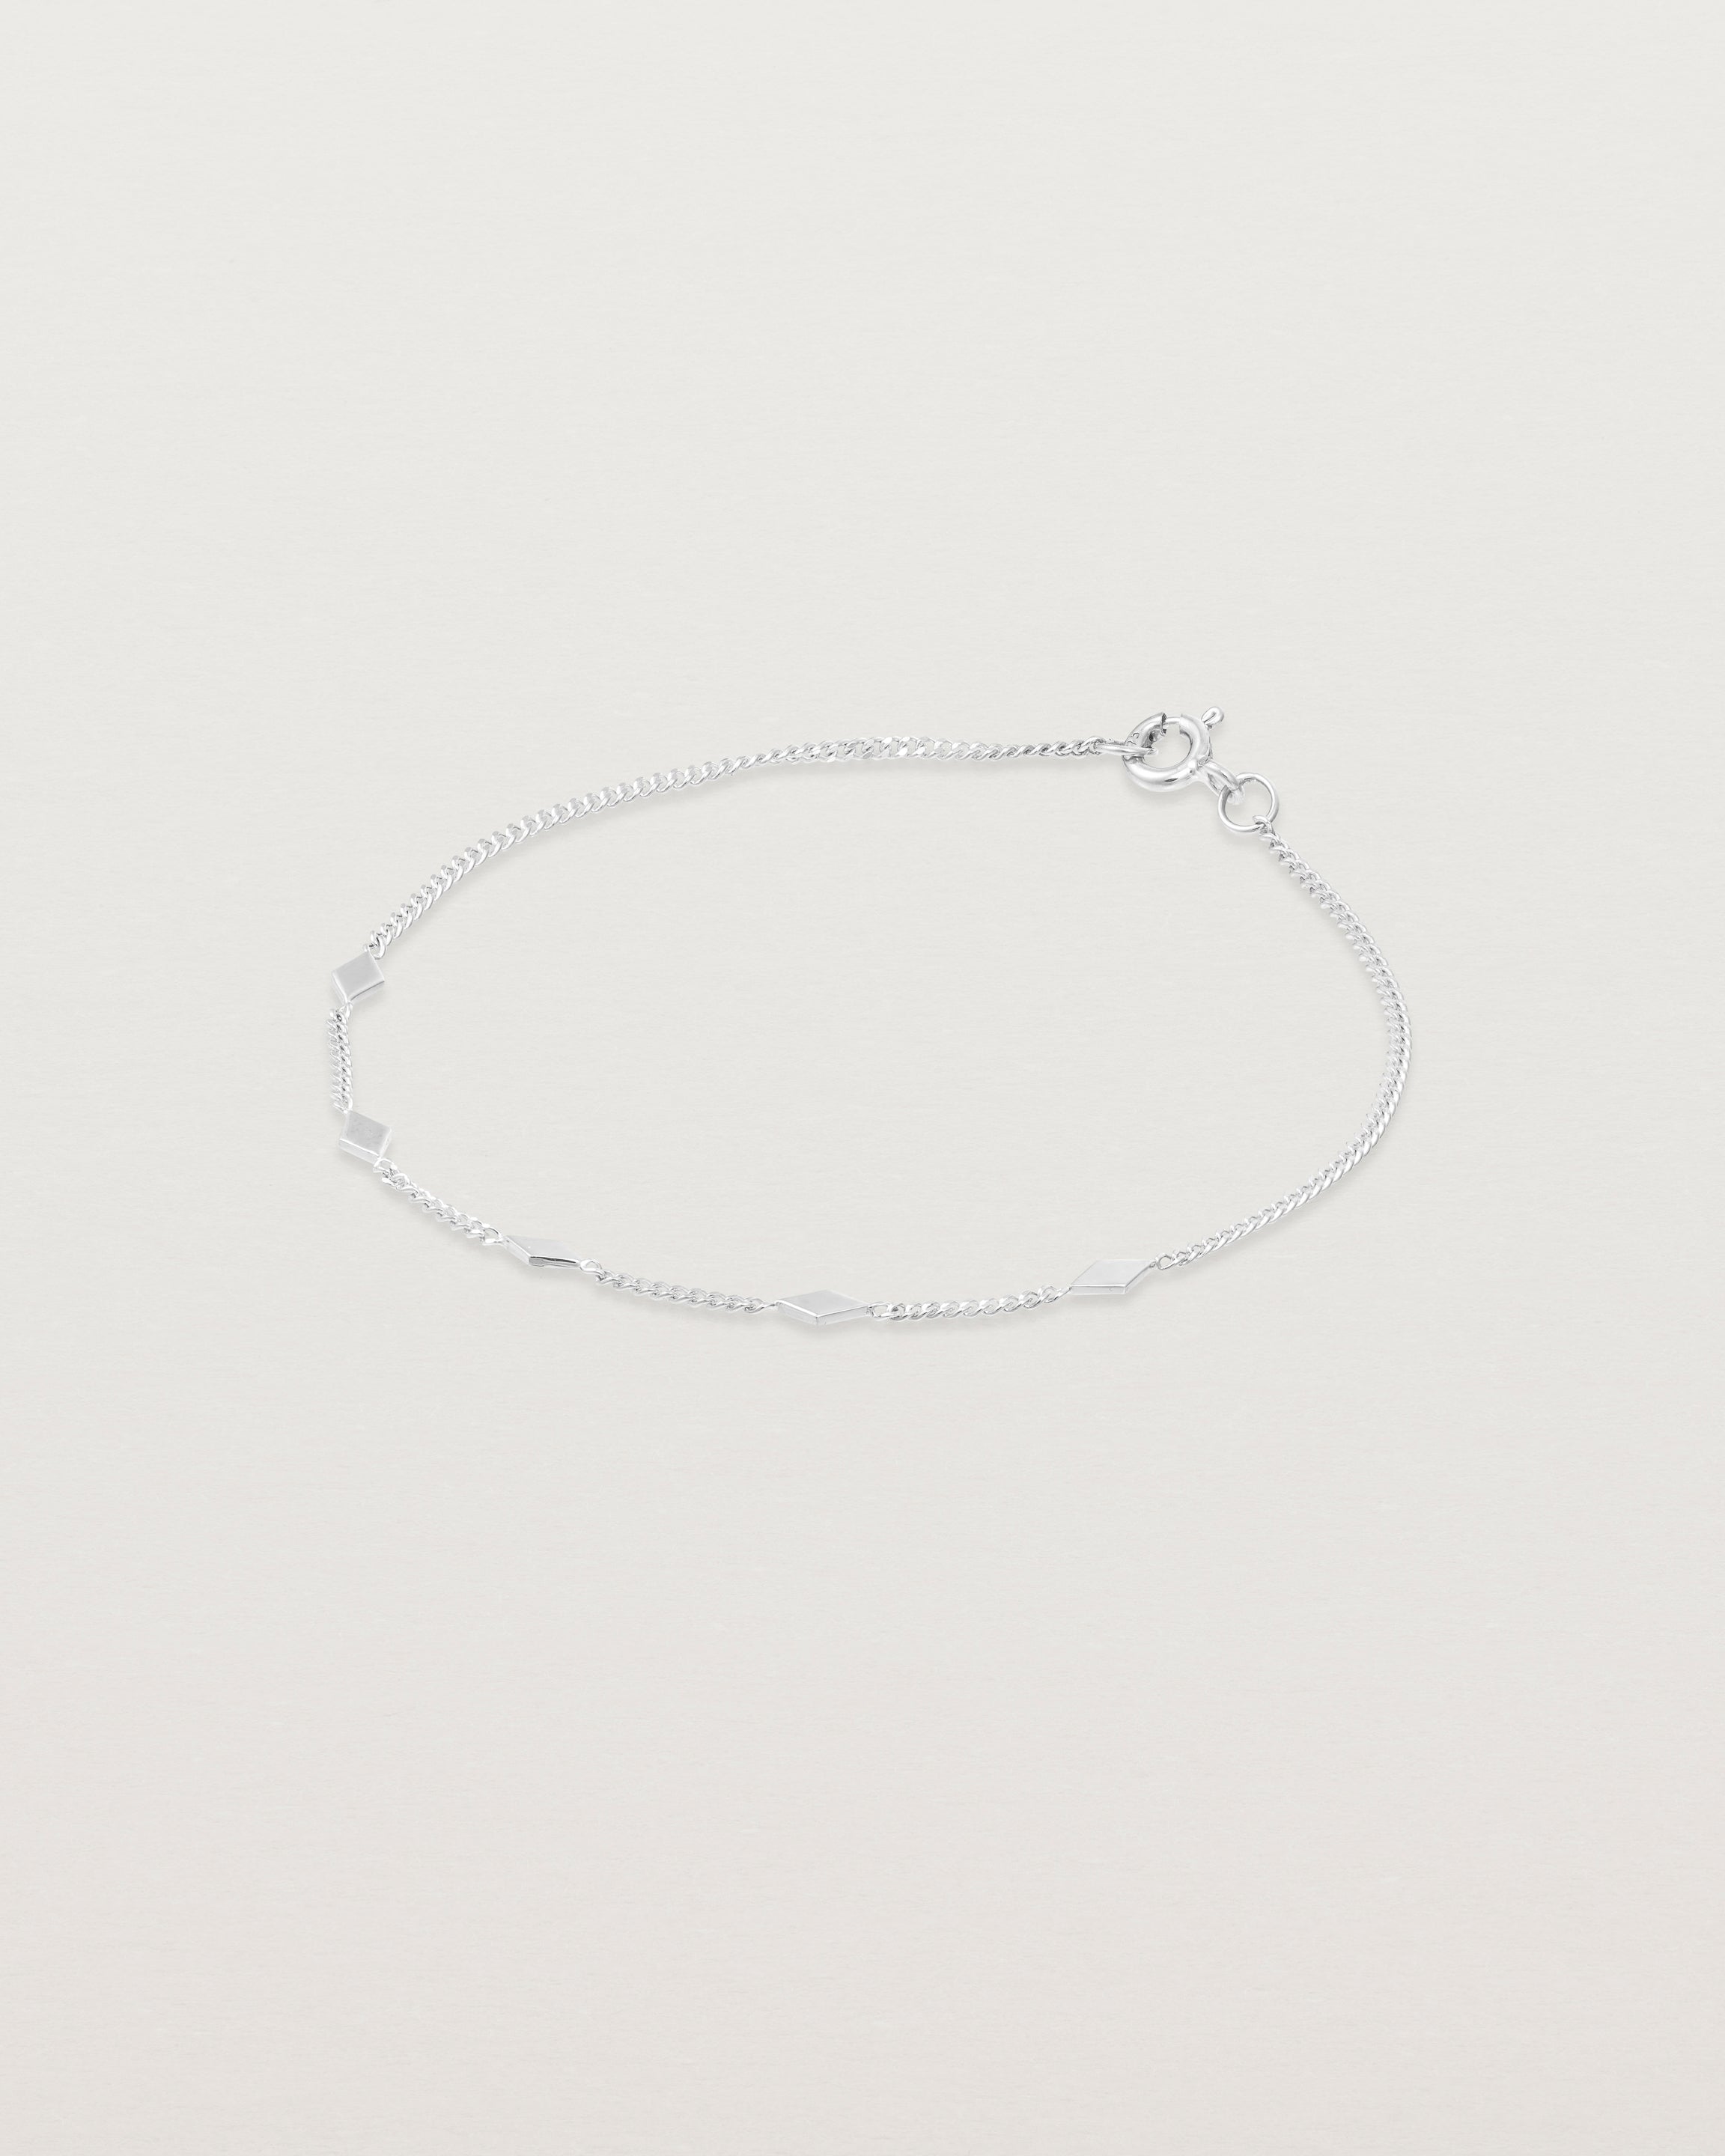 Top down view of the Nuna Charm Bracelet in Sterling Silver.